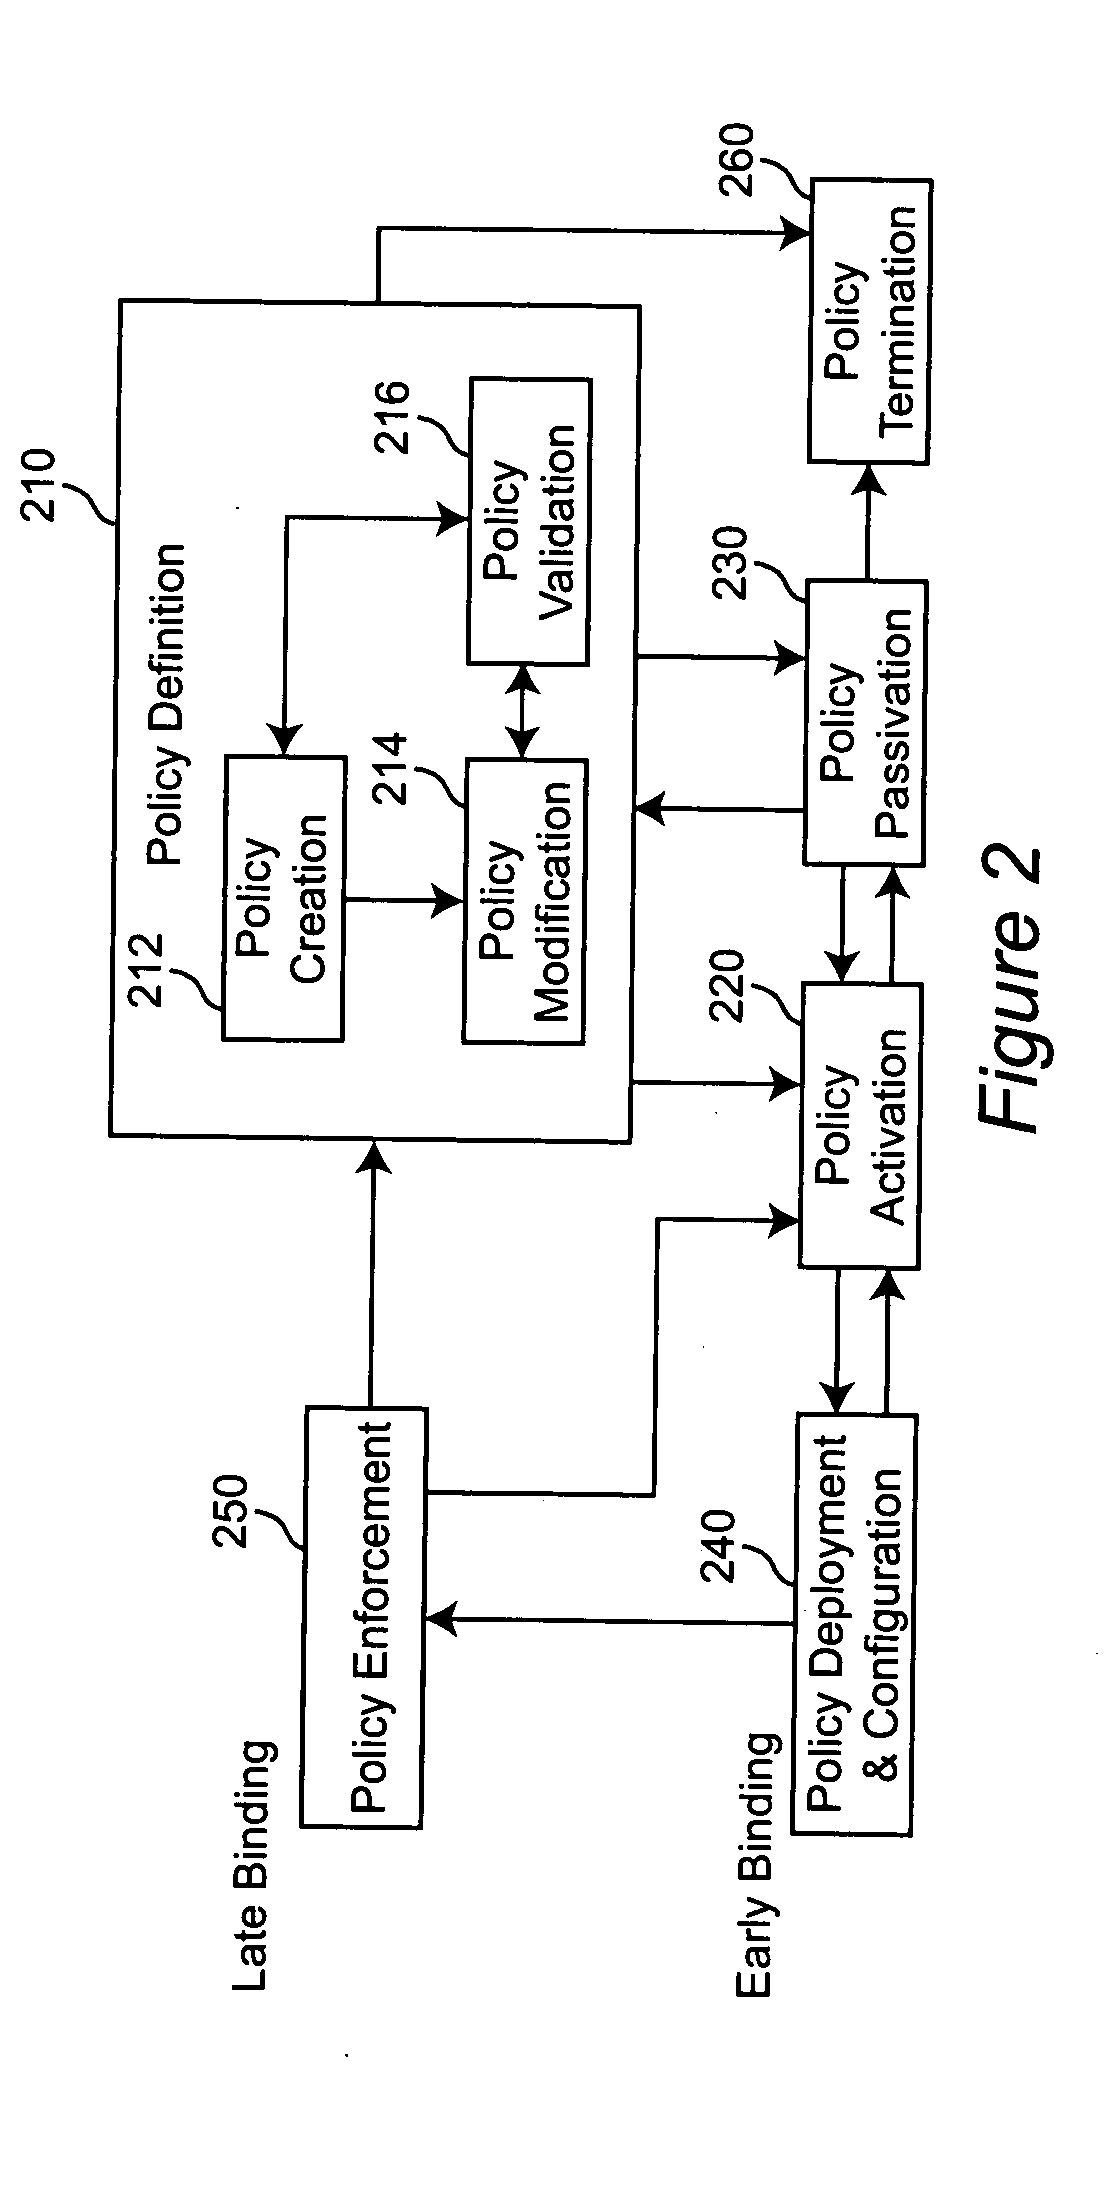 Method and apparatus of on demand business activity management using business performance management loops